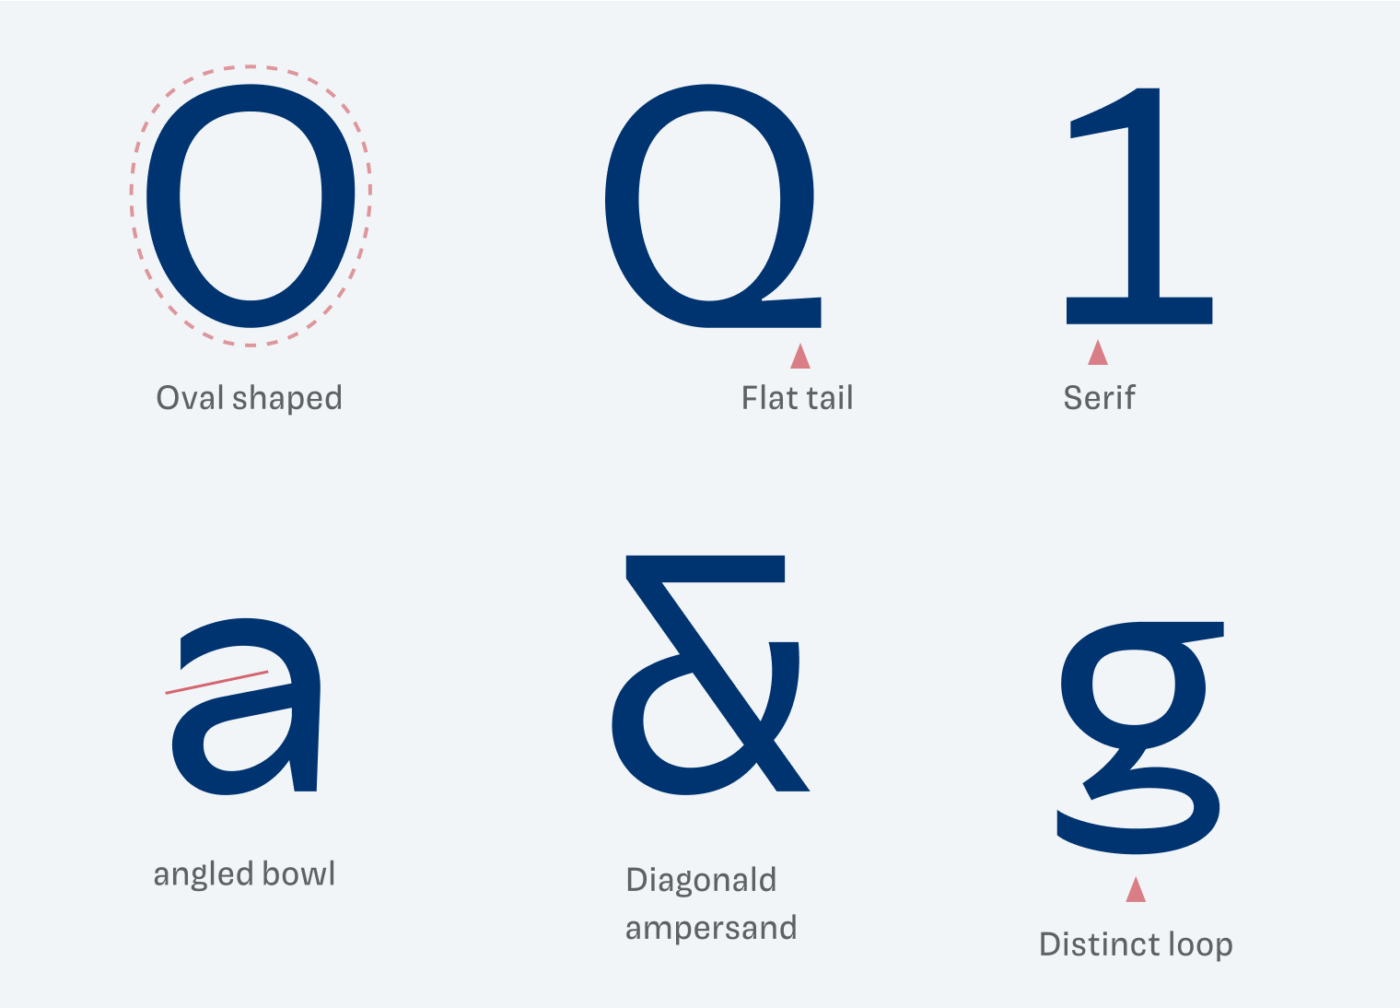 The O ist oval shaped. The upper case Q has a flat tail. The number 1 has a serif. The a has a angled bowl. The Ampersand is diagonal, the g has a special tail.